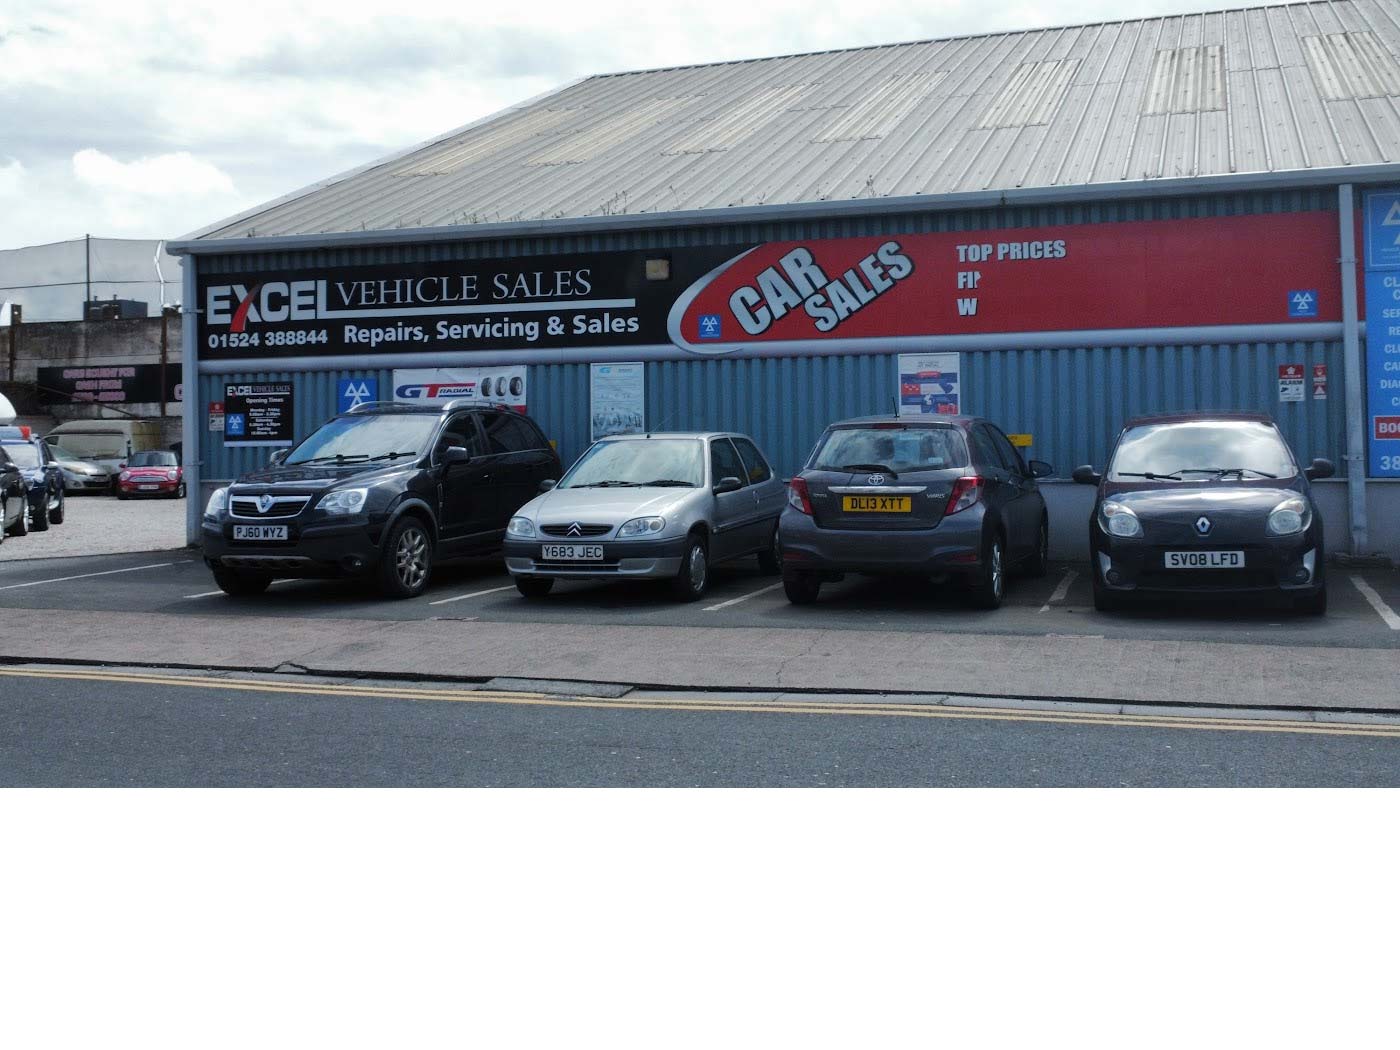 Contact Excel Vehicle Sales, Morecambe